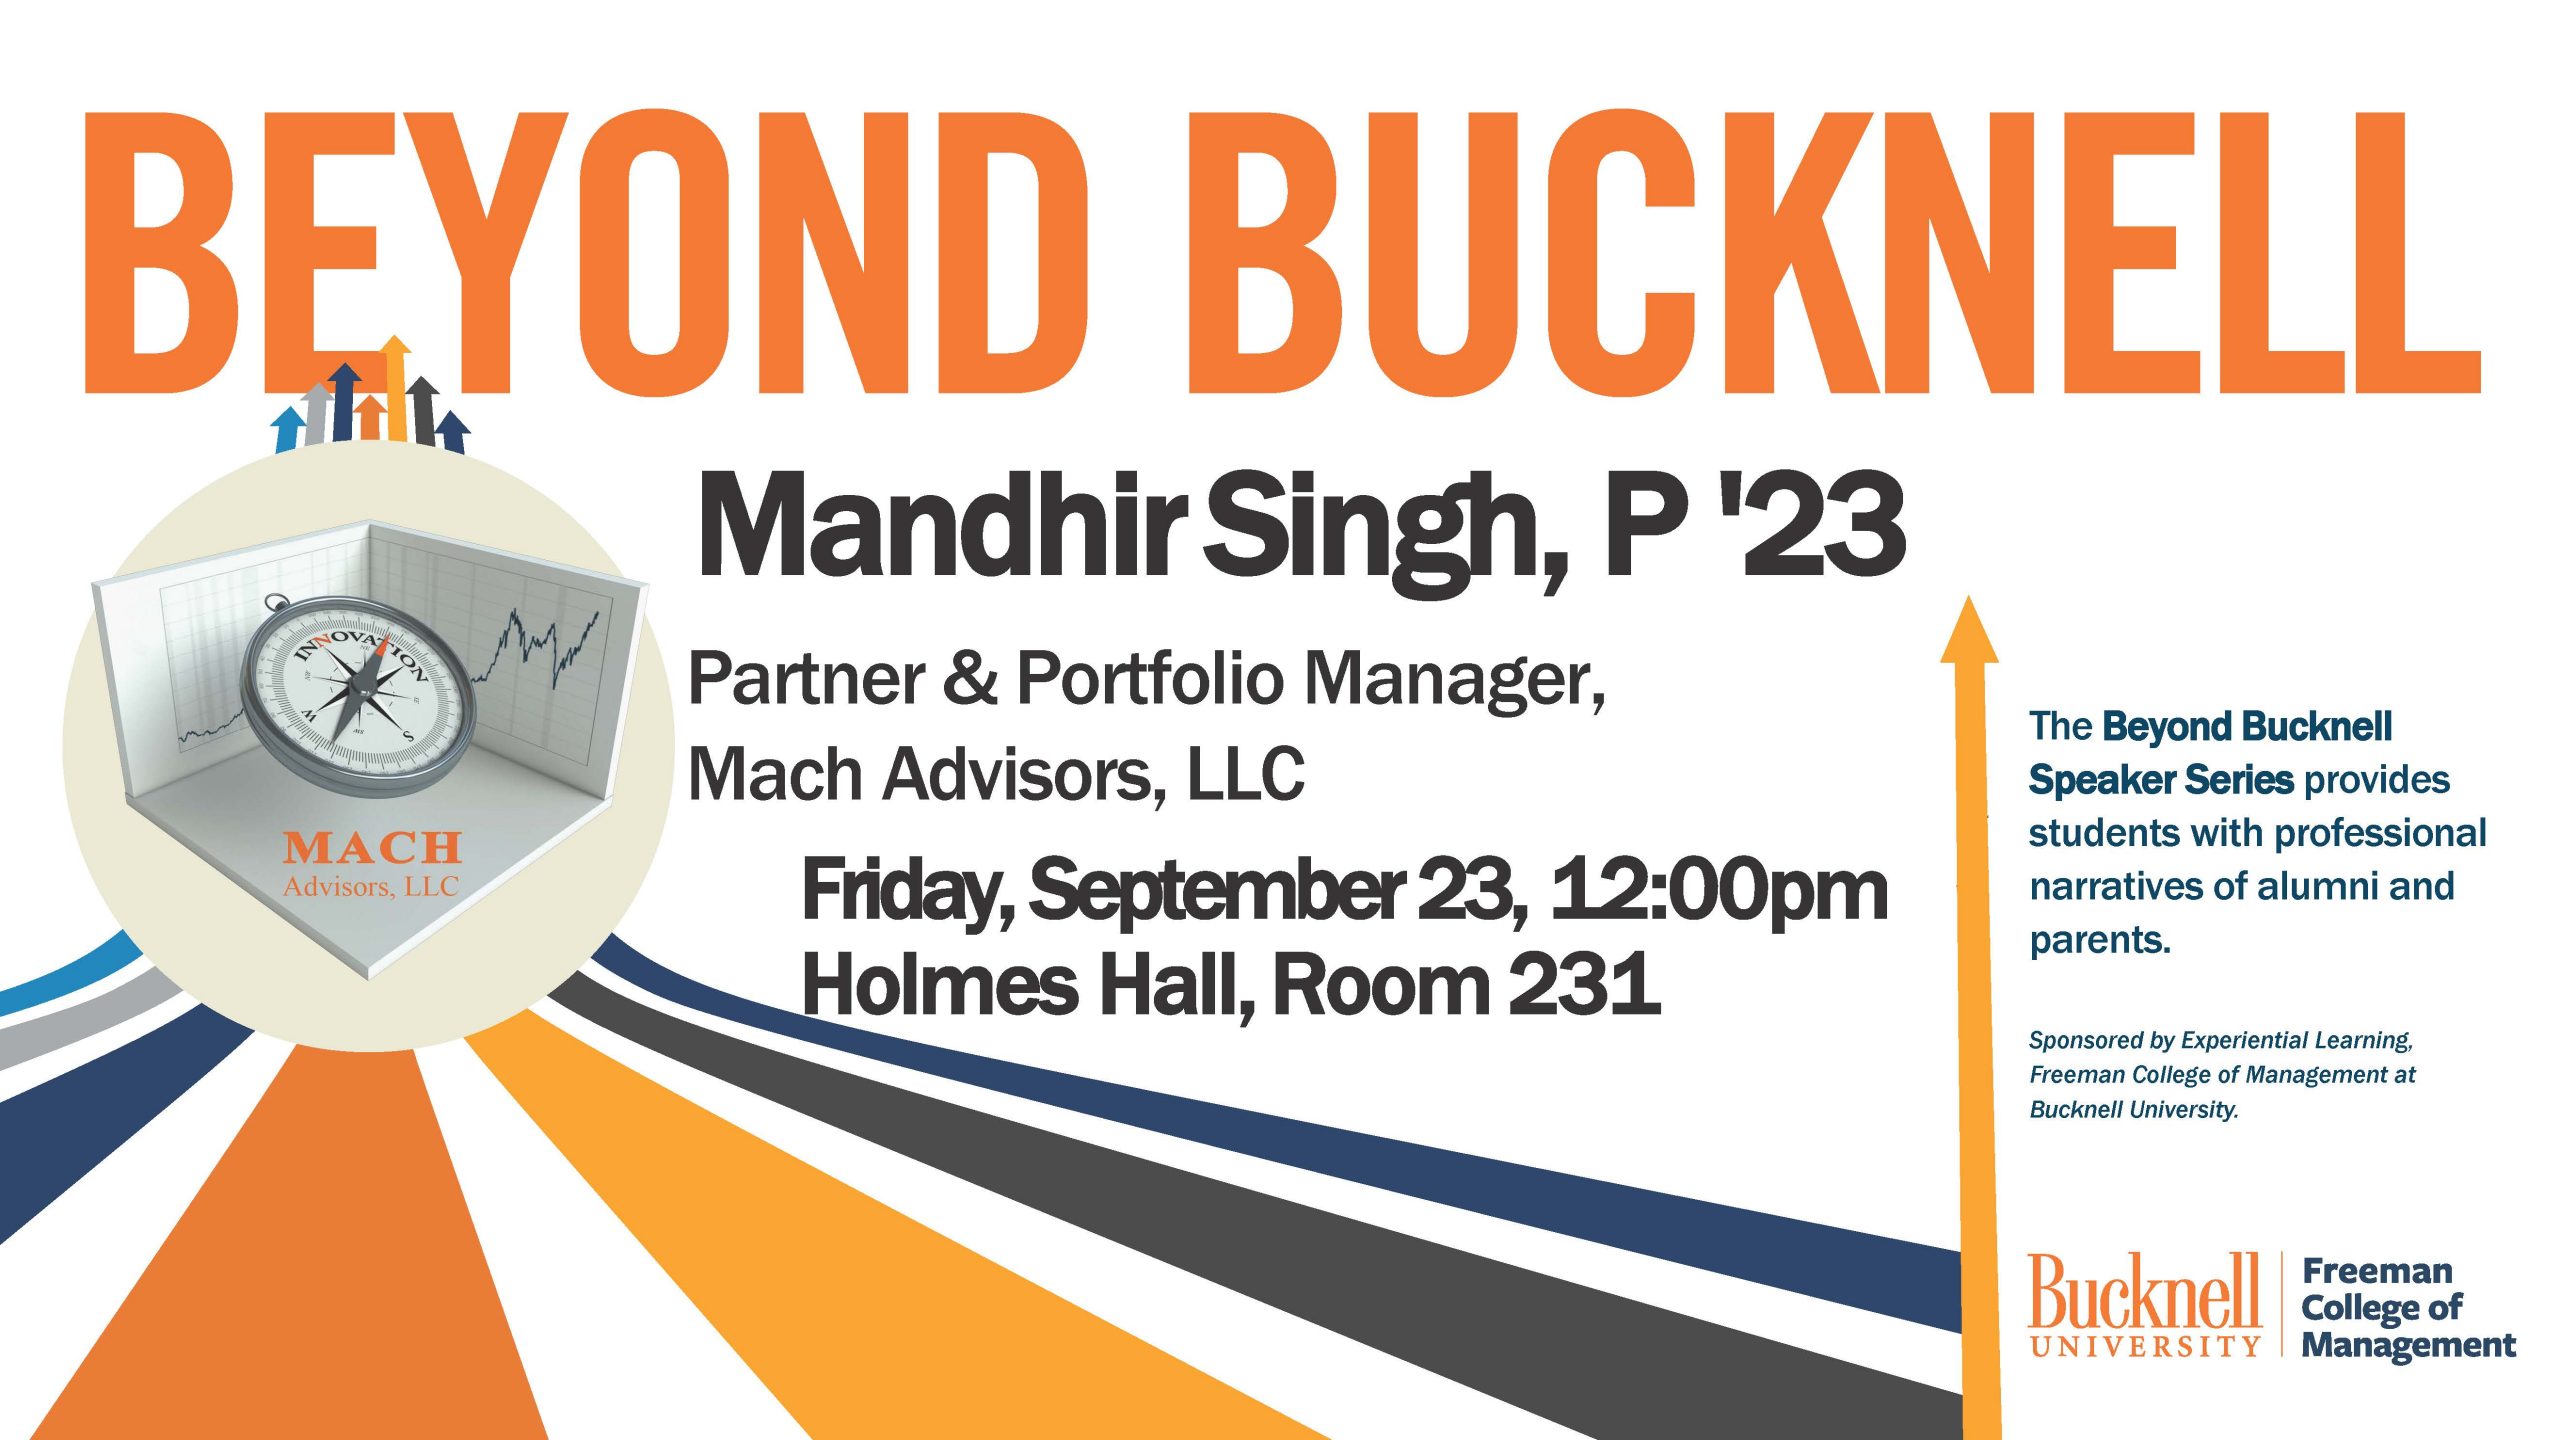 Lunch and Learn Session with Partner and Portfolio Manager: OPEN TO ALL!